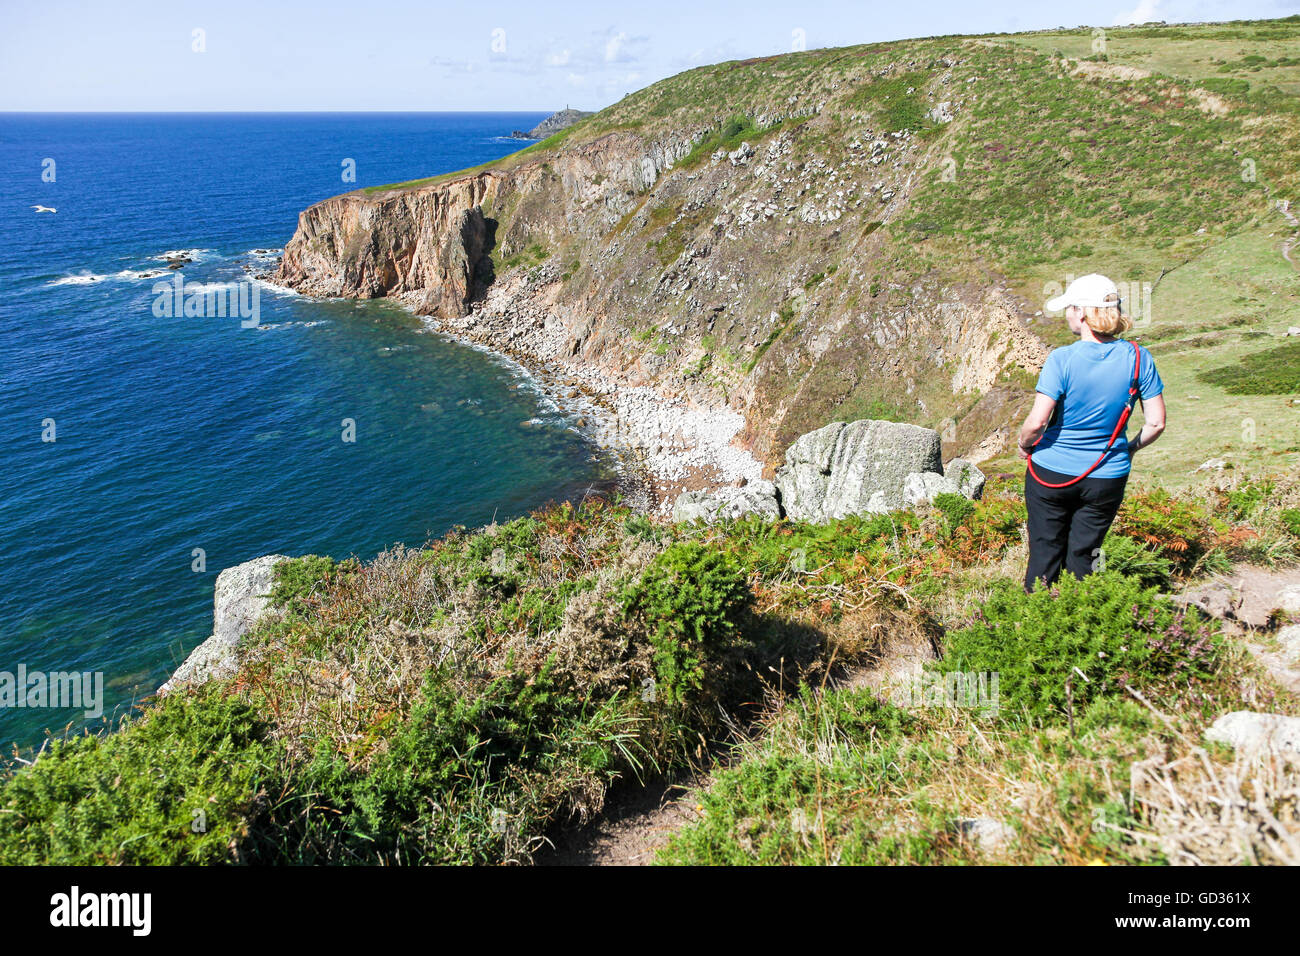 A woman looking out to sea at Tregiffian Vean cliff near to Sennen Cove Cornwall England UK Stock Photo